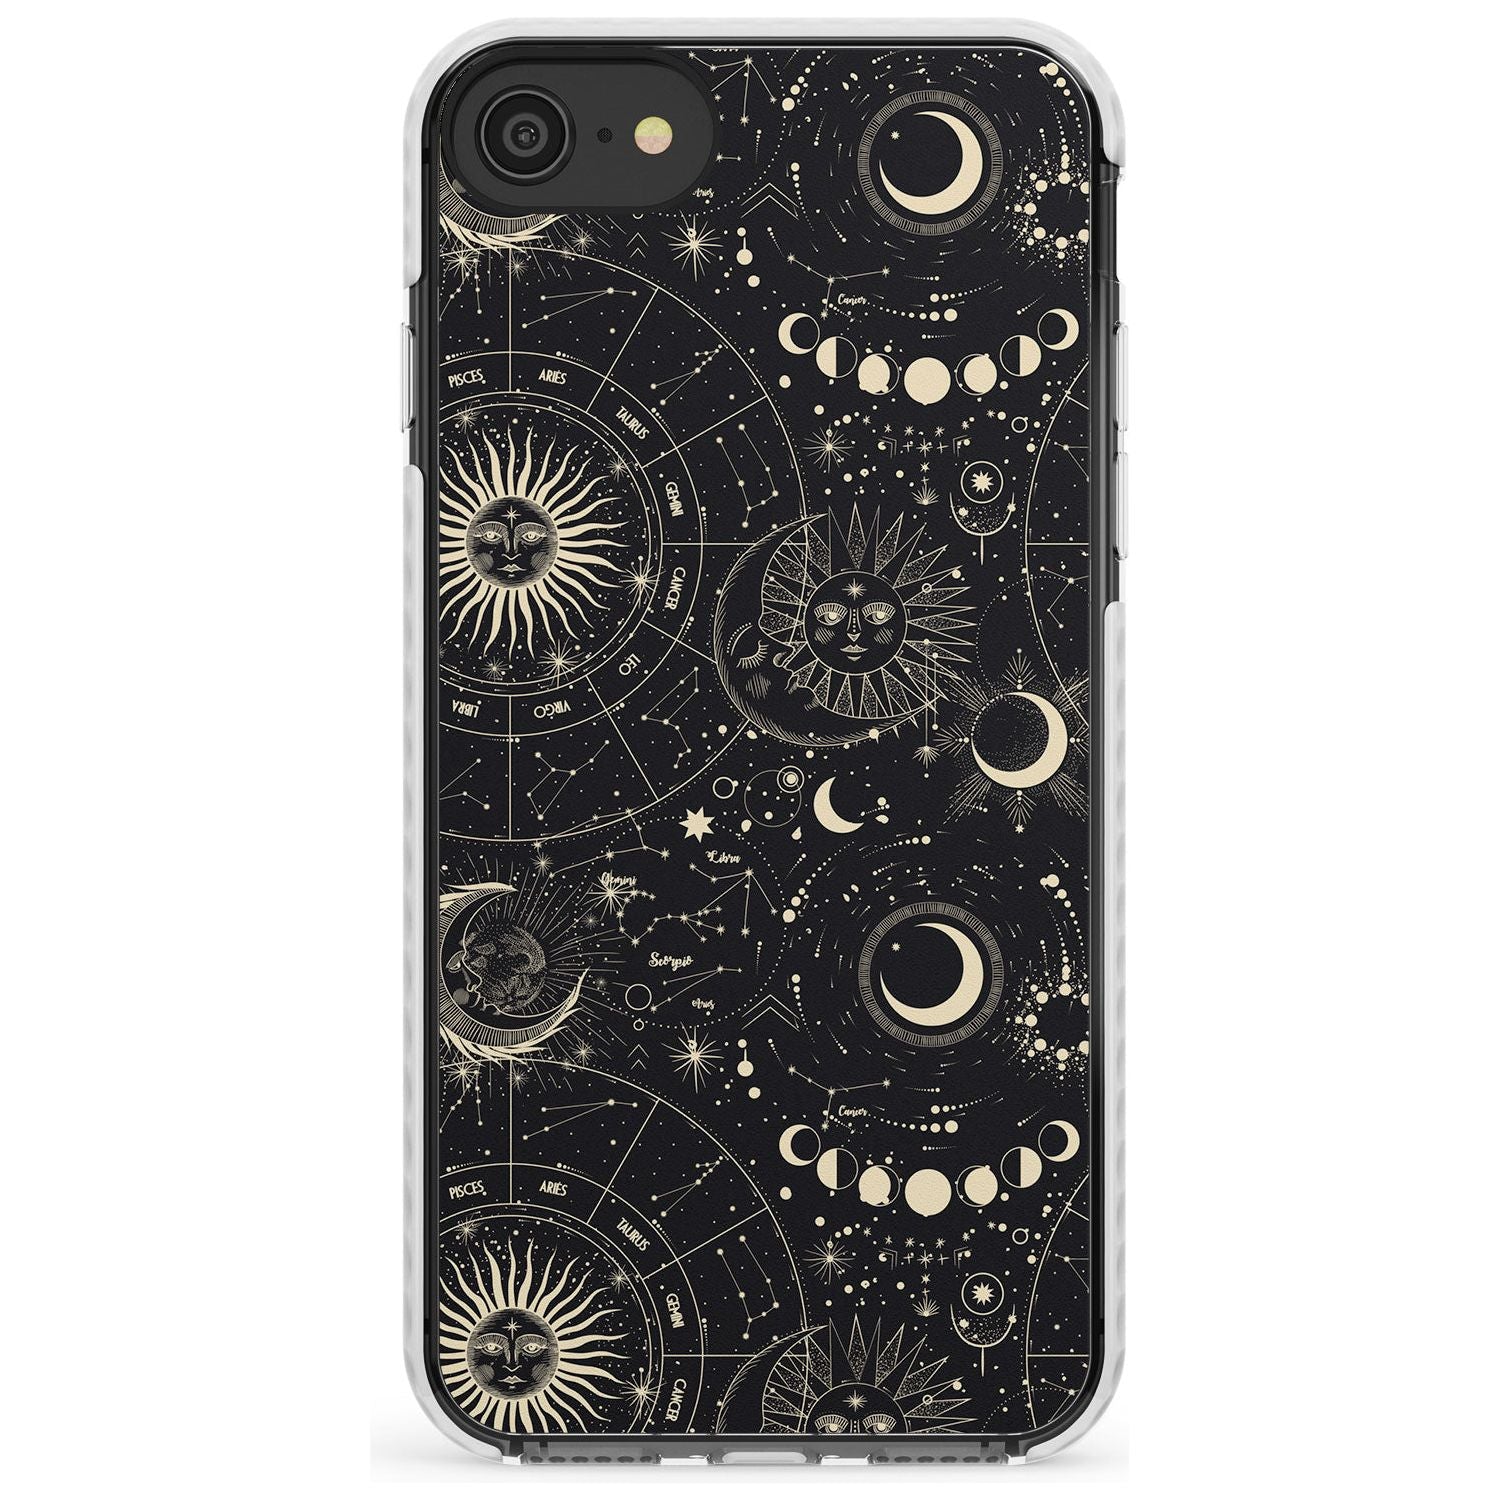 Suns, Moons & Star Signs Slim TPU Phone Case for iPhone SE 8 7 Plus